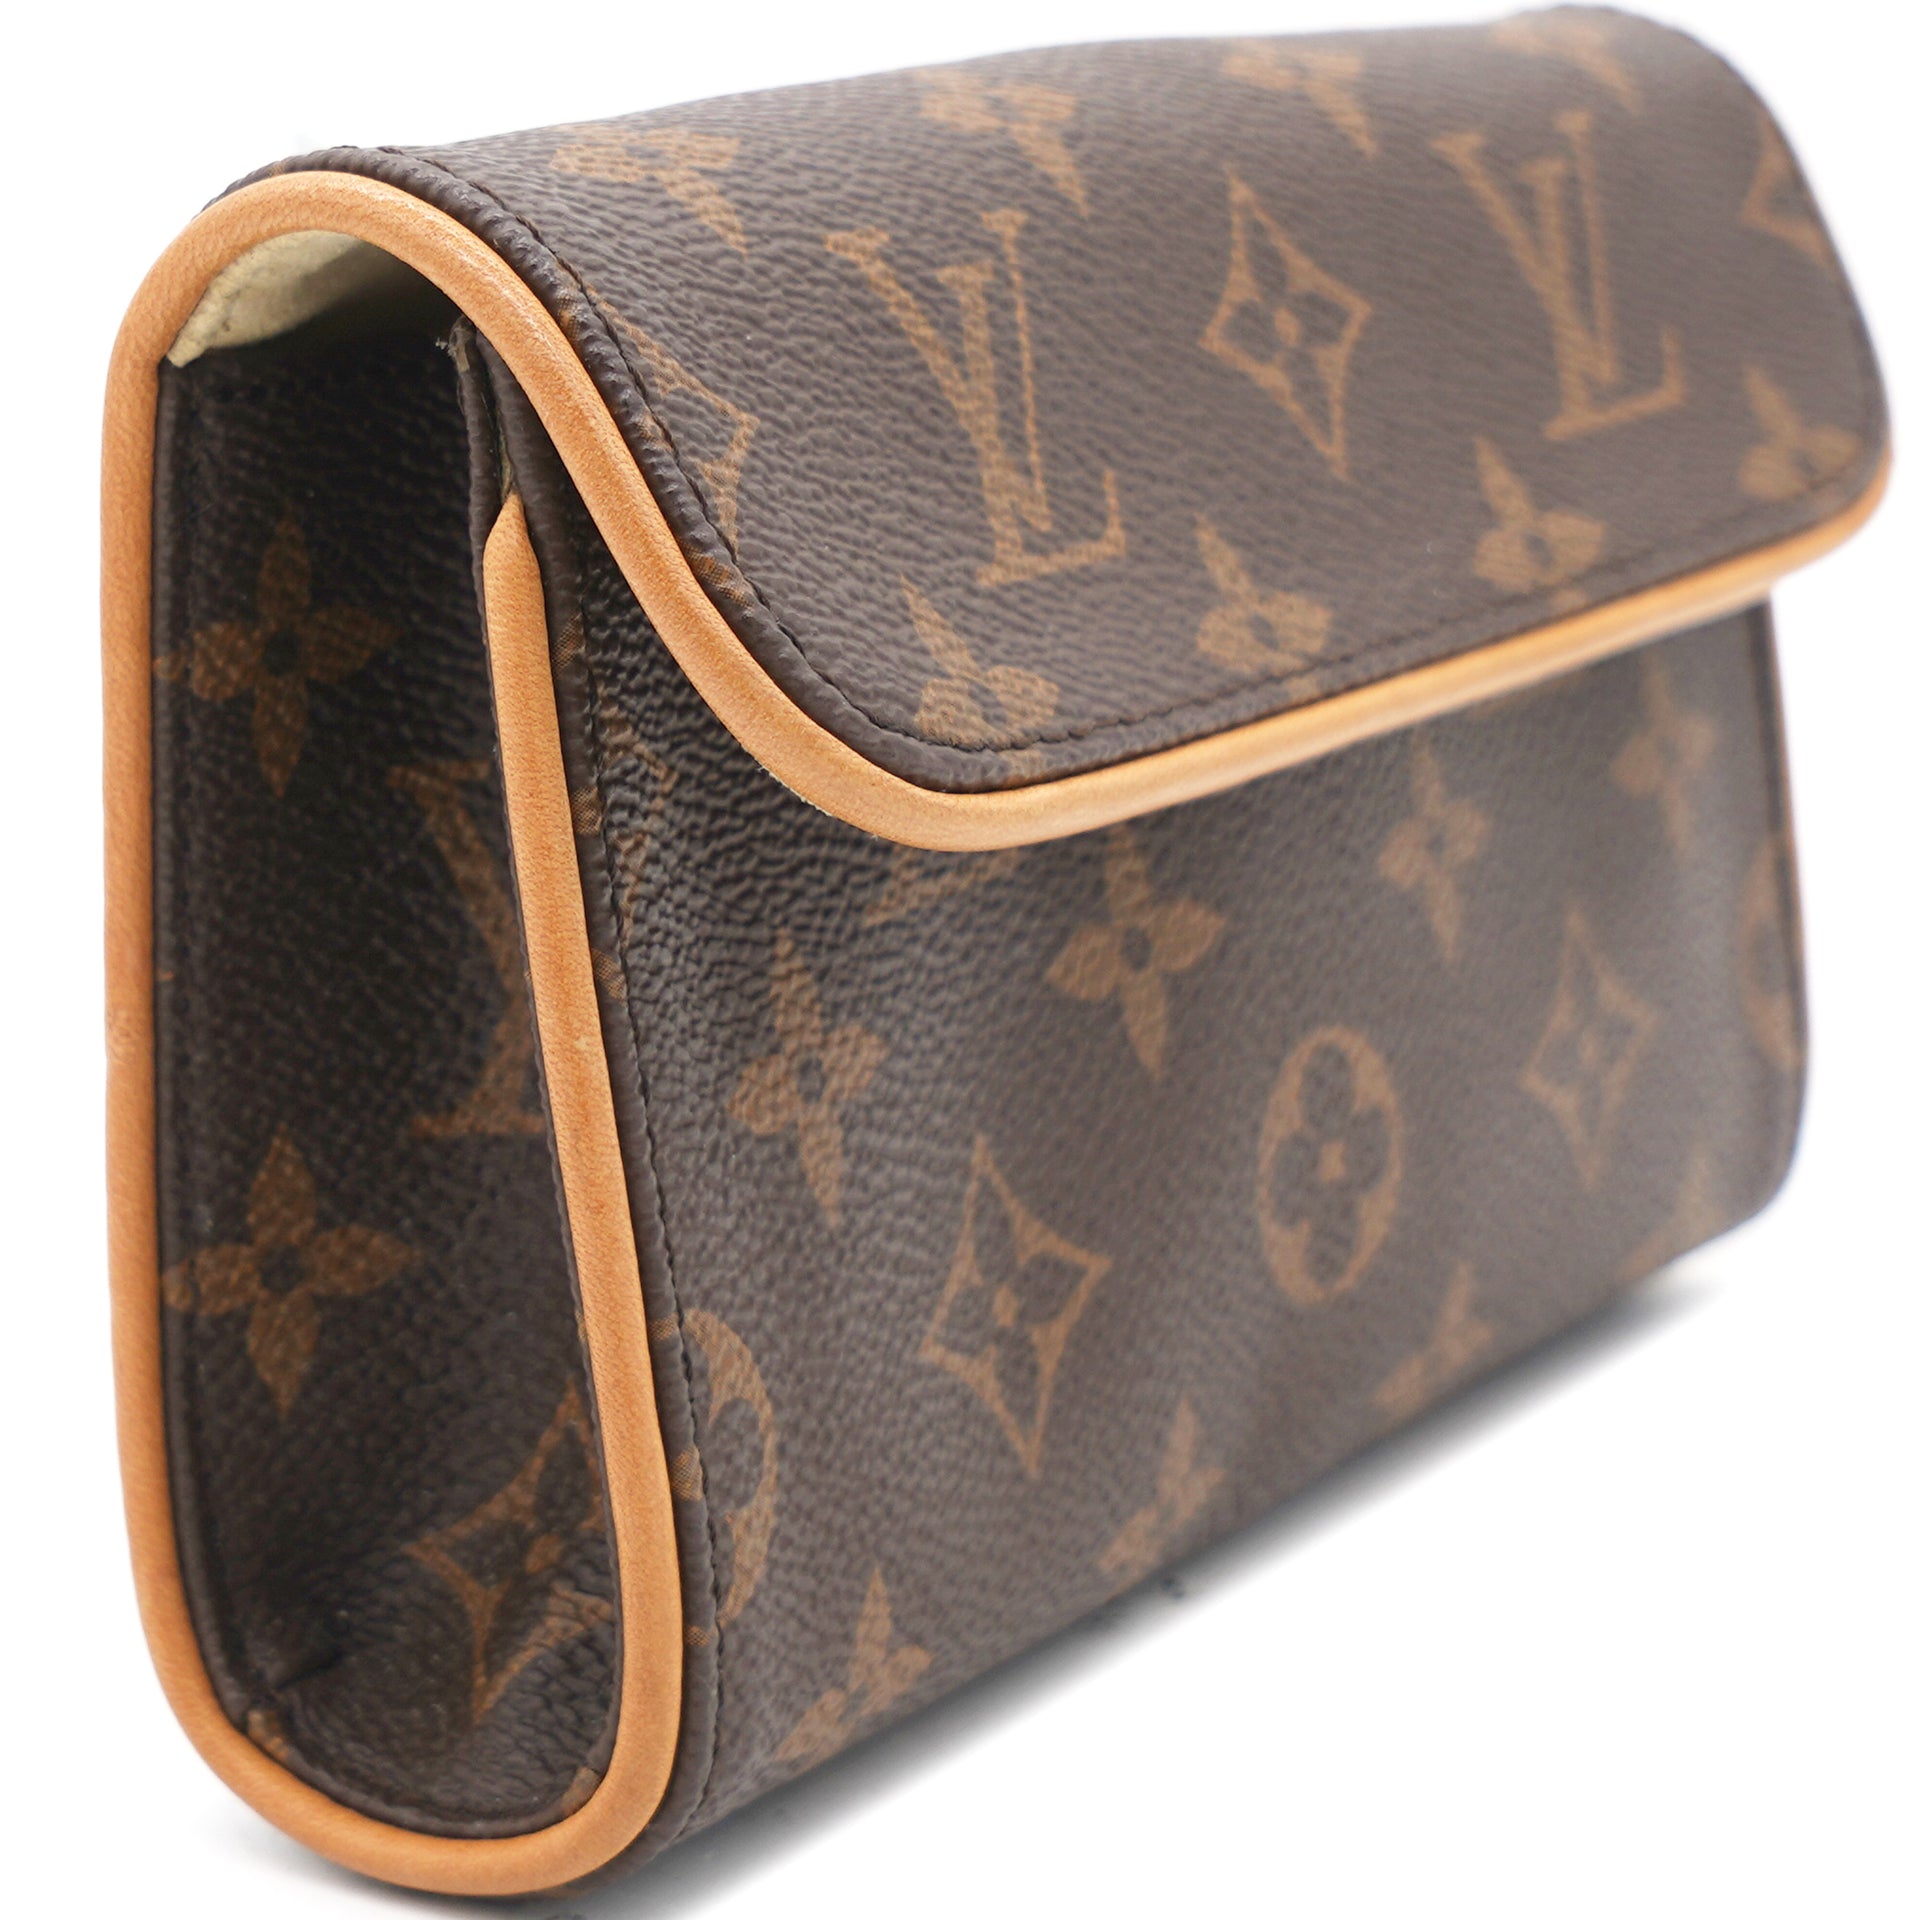 Is It 2002 Again, Because Louis Vuitton Logo Bags Are Everywhere